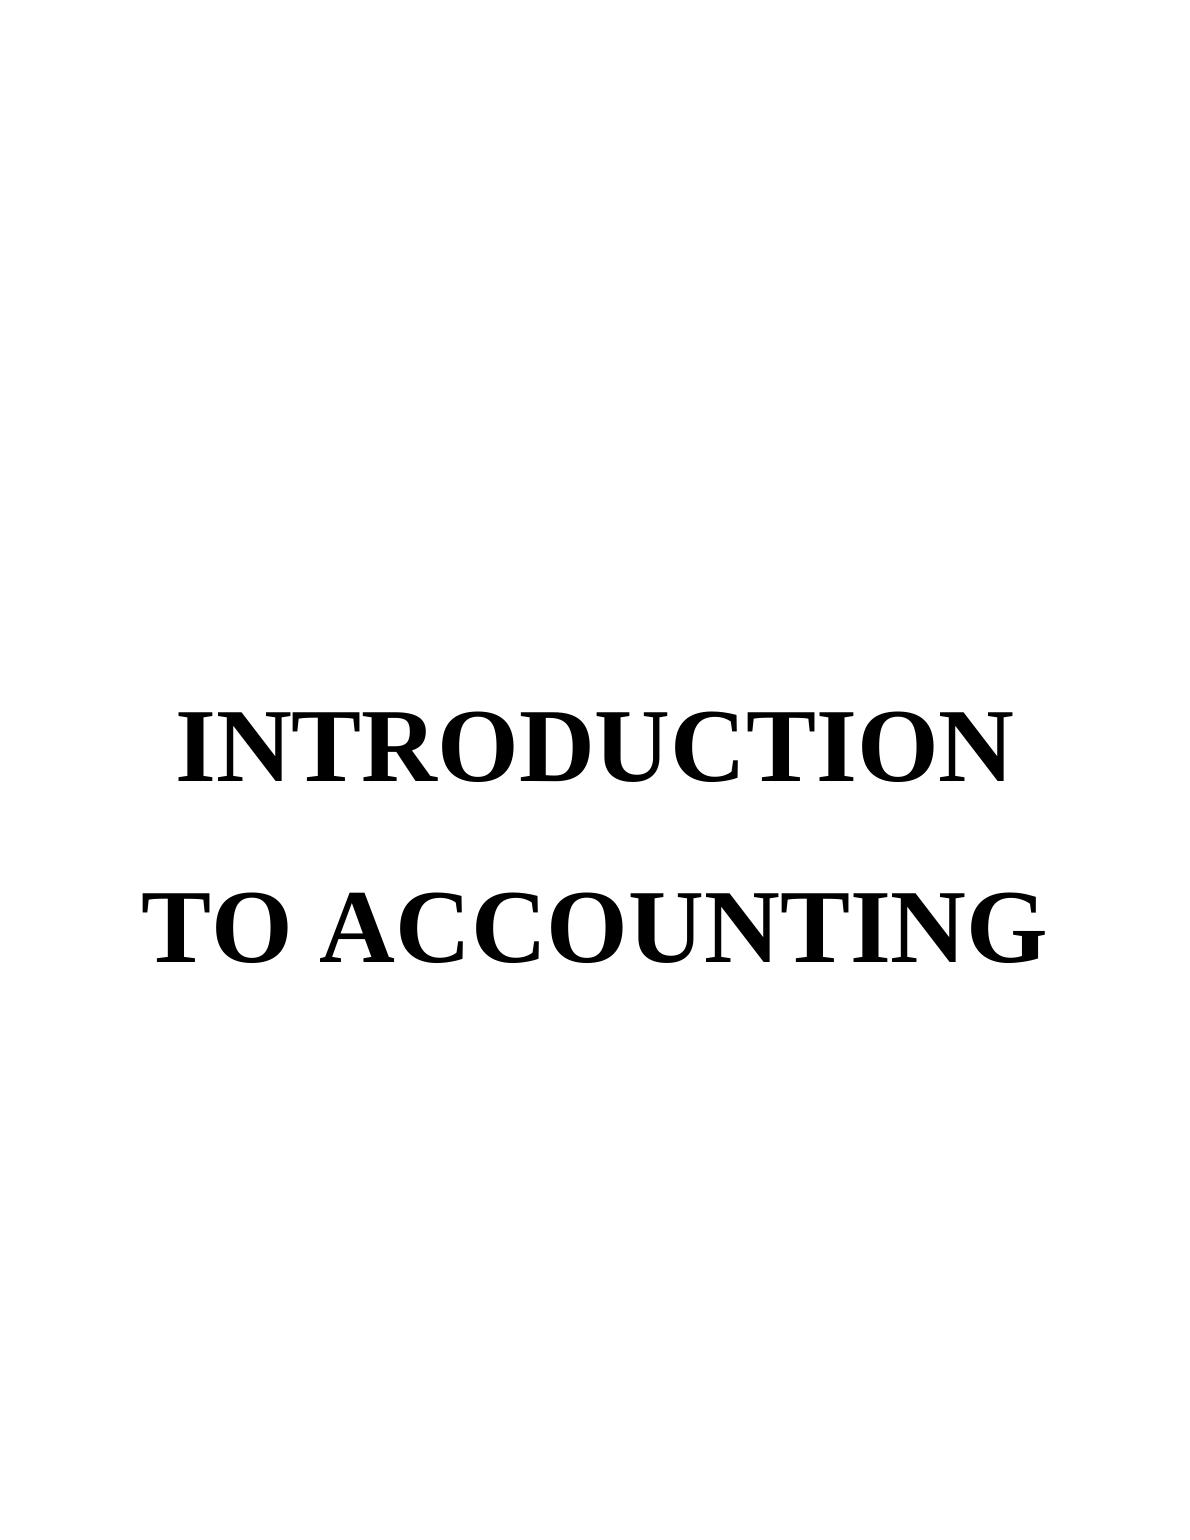 Introduction to accounting_1